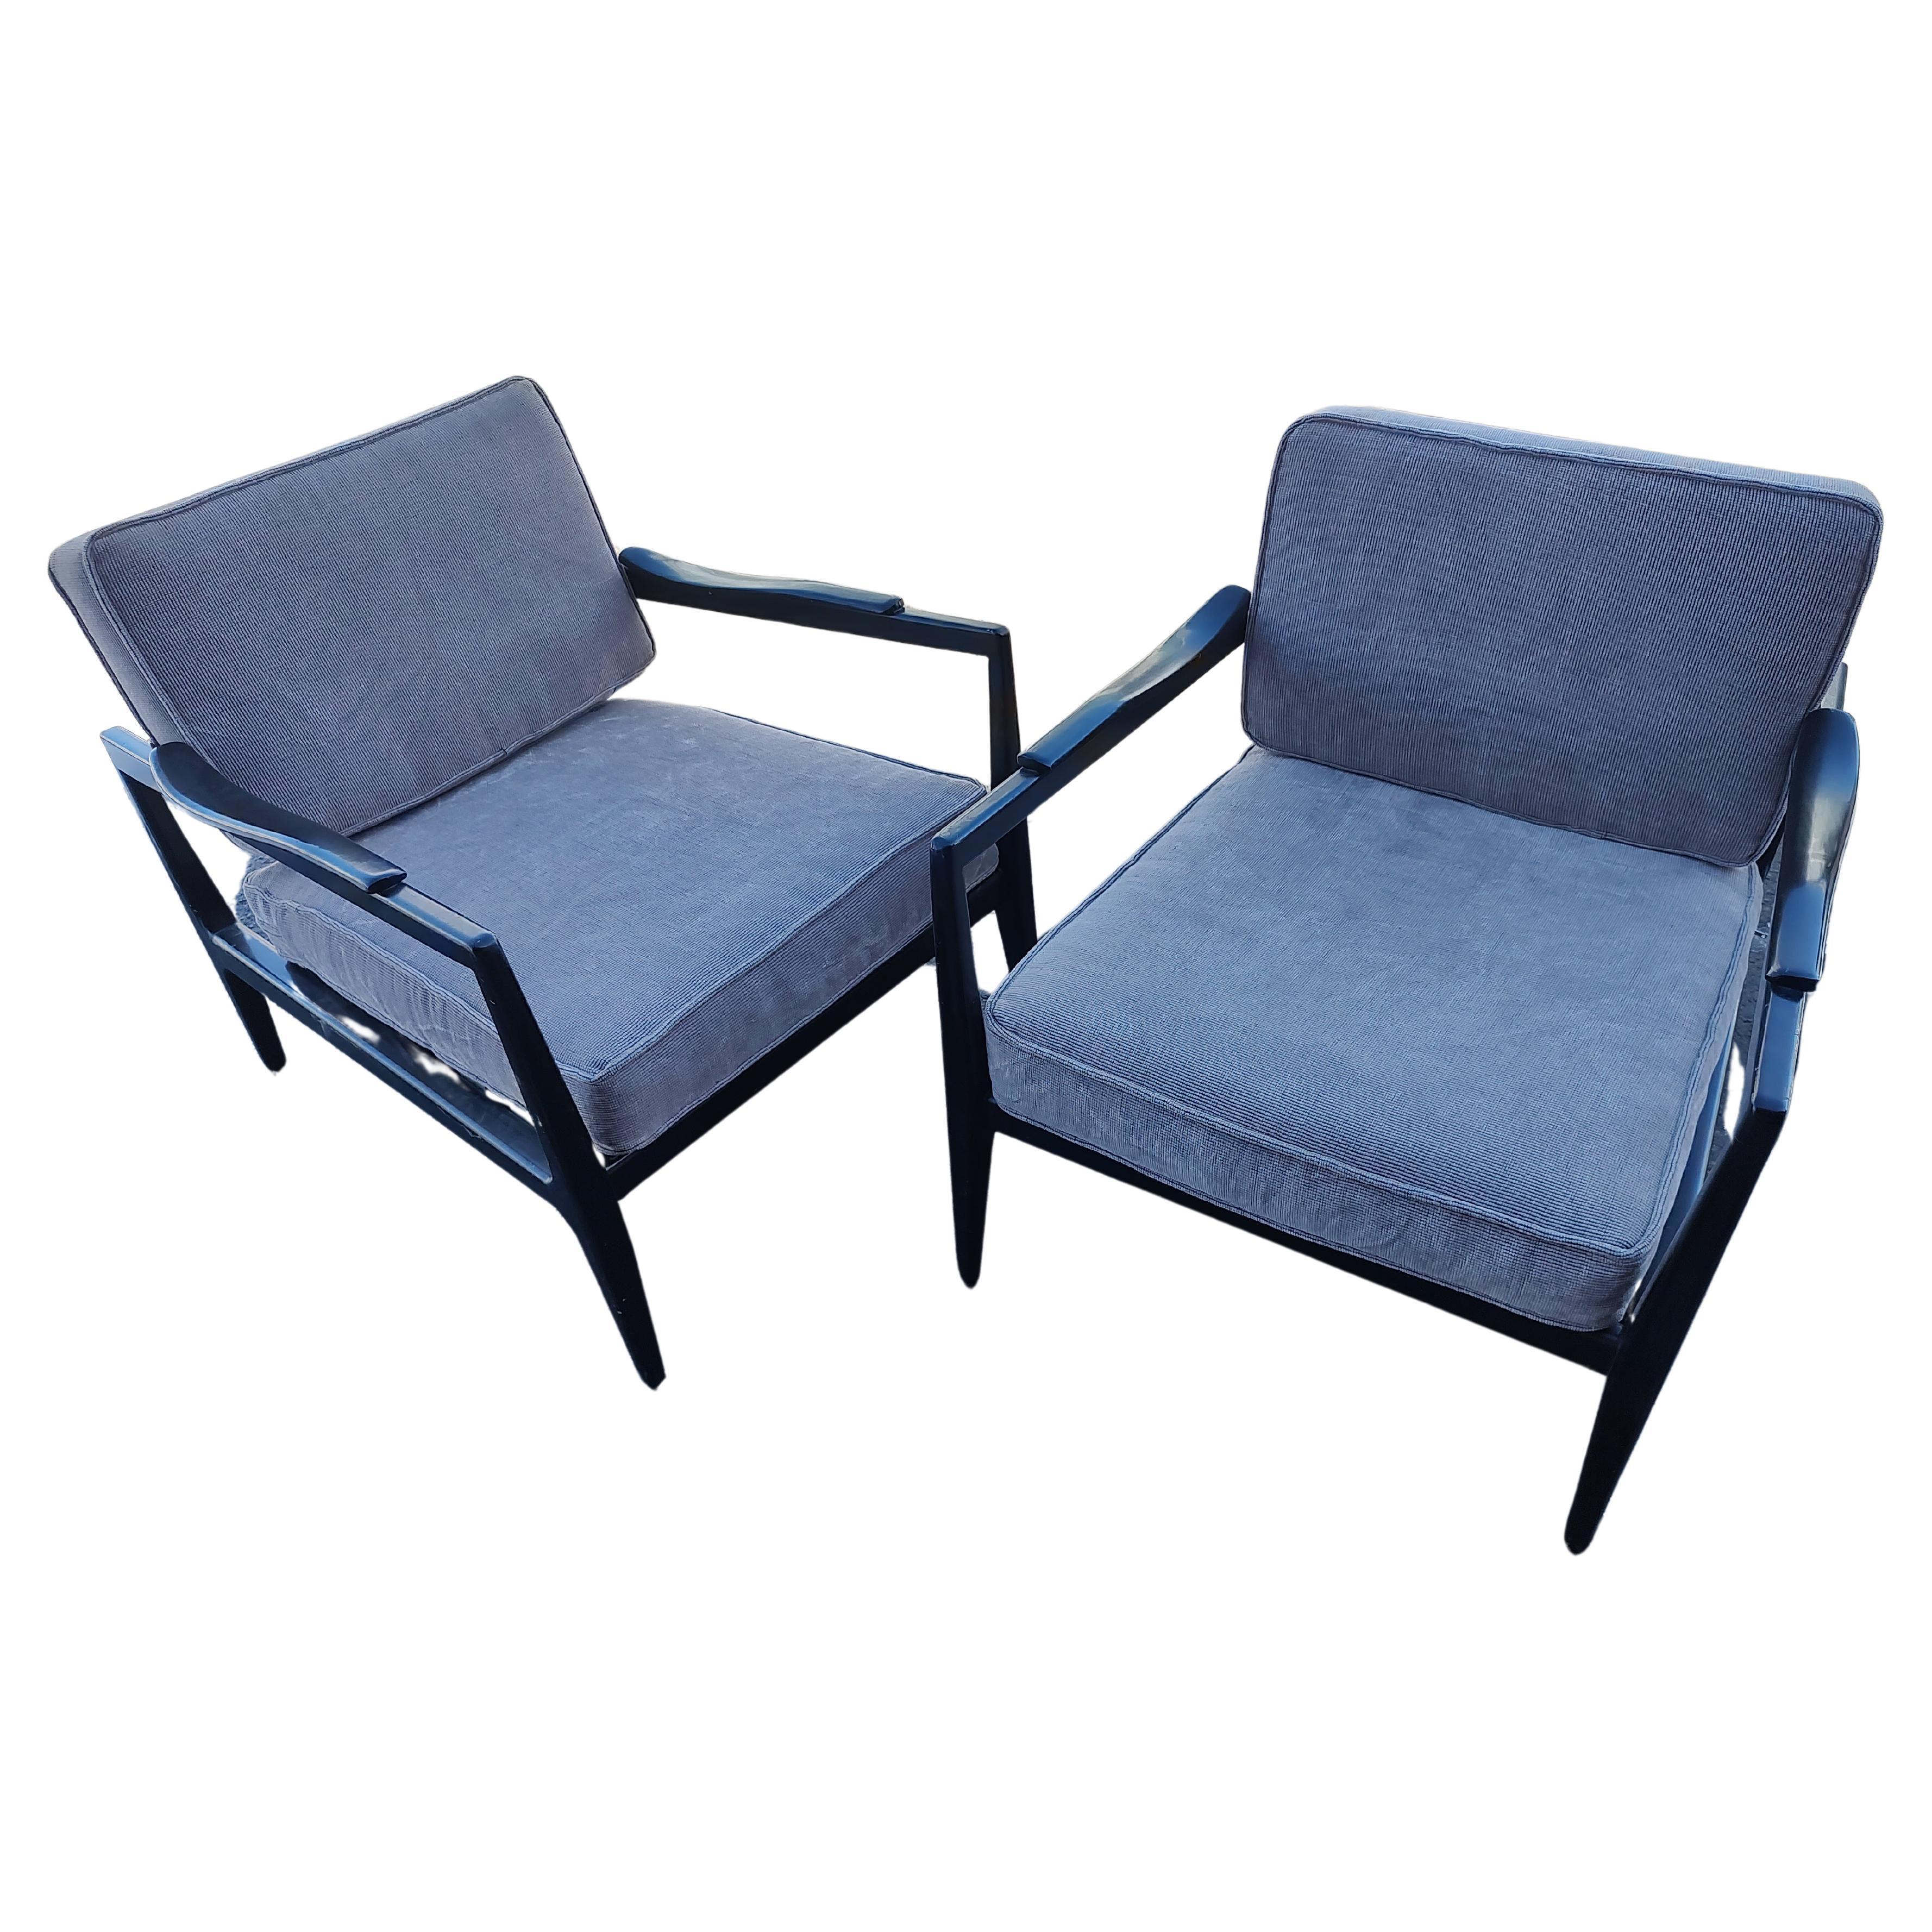 Pair of Mid Century Modern Sculptural Lounge Chairs by Edmond Spence In Good Condition For Sale In Port Jervis, NY